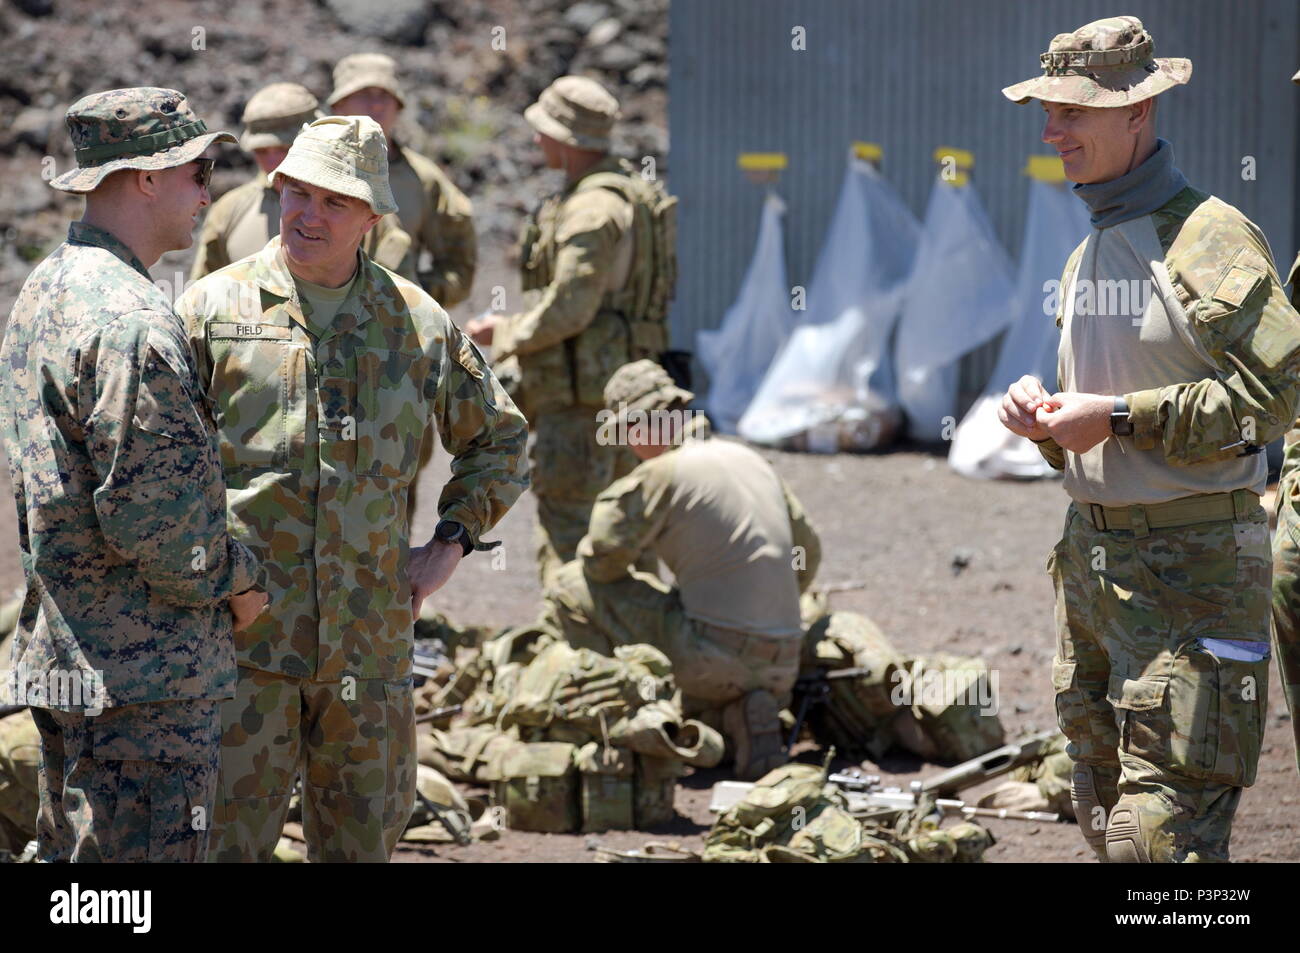 Australian Army officer Brigadier Christopher Field (centre left), CSC, of 3rd Brigade, with a United States marine at Pohakuloa training area, Hawaii, during Exercise Rim of the Pacific 2016 on